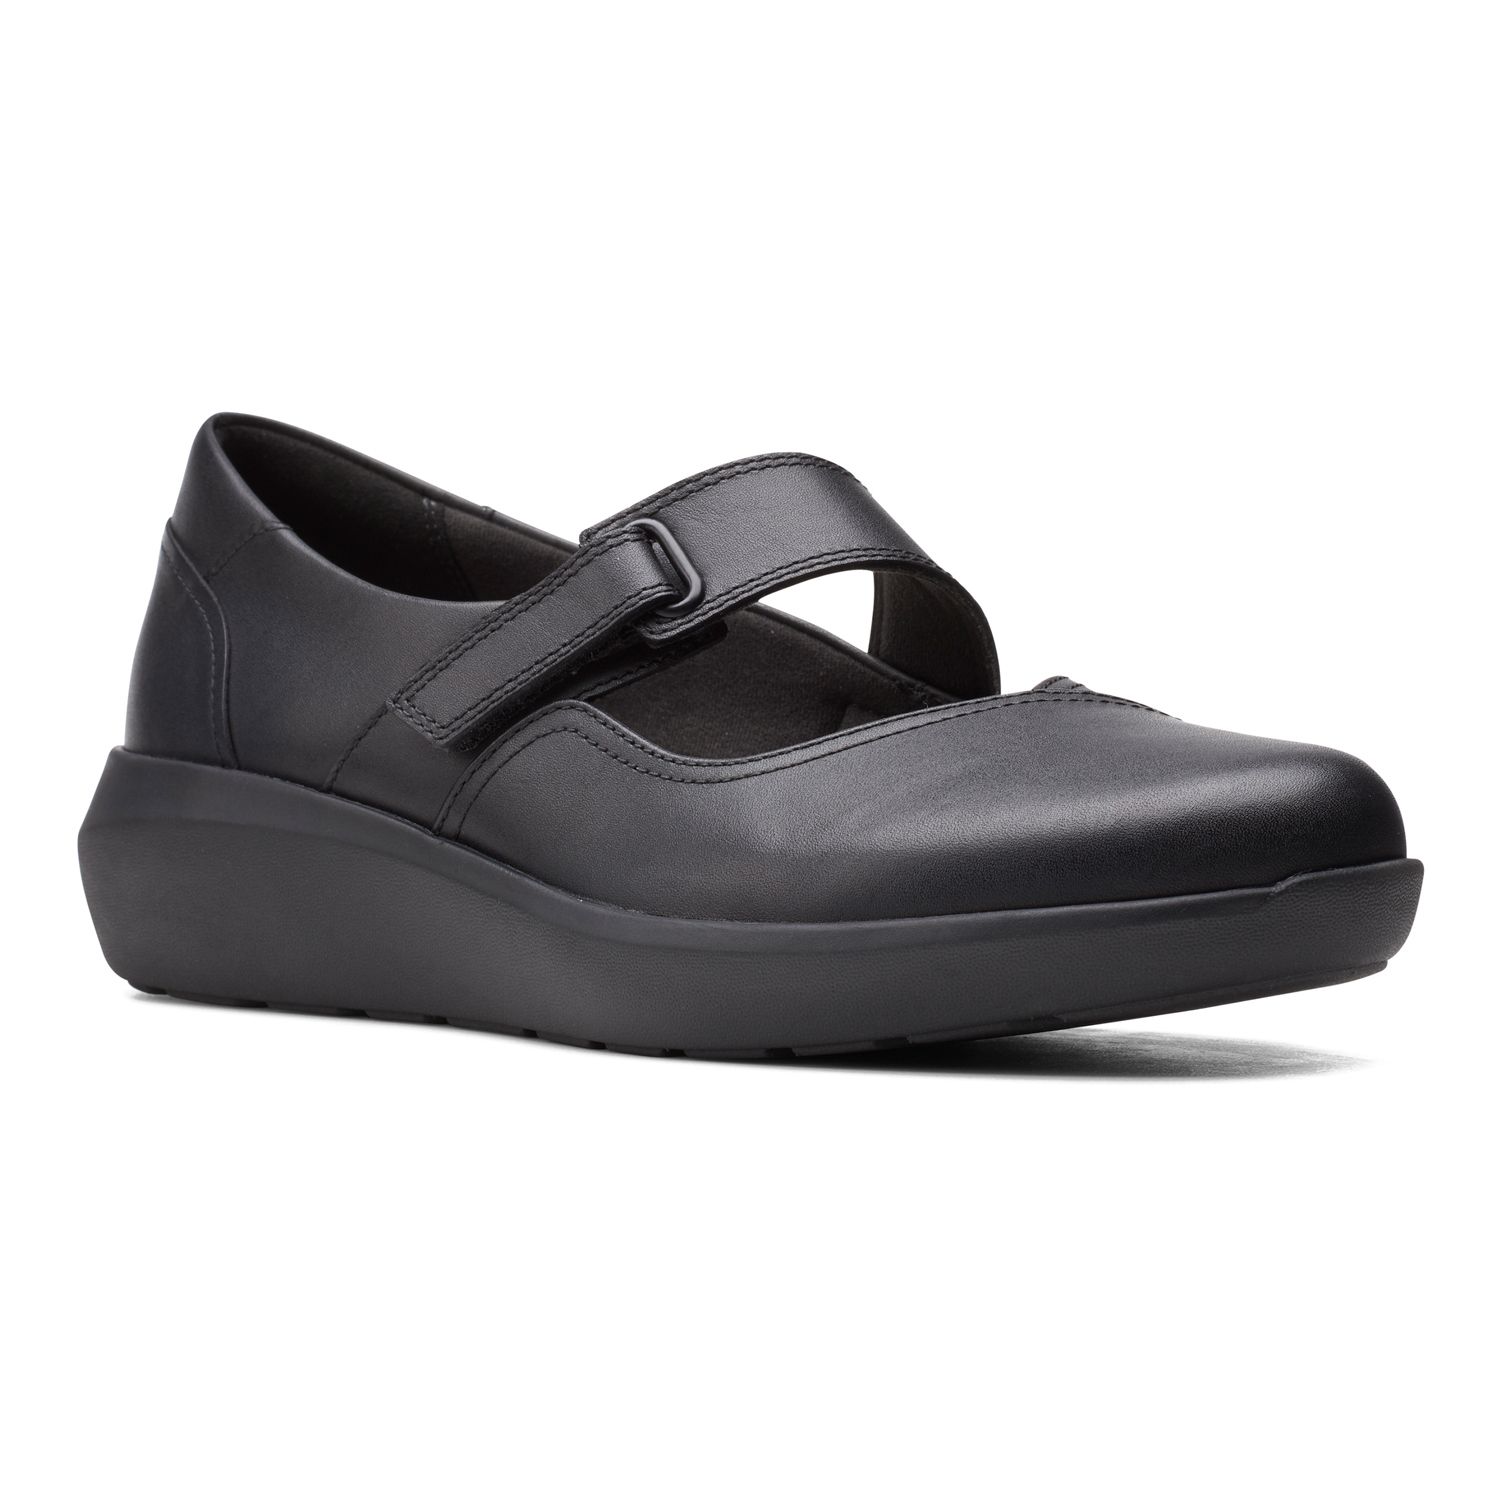 clarks mary jane ladies shoes